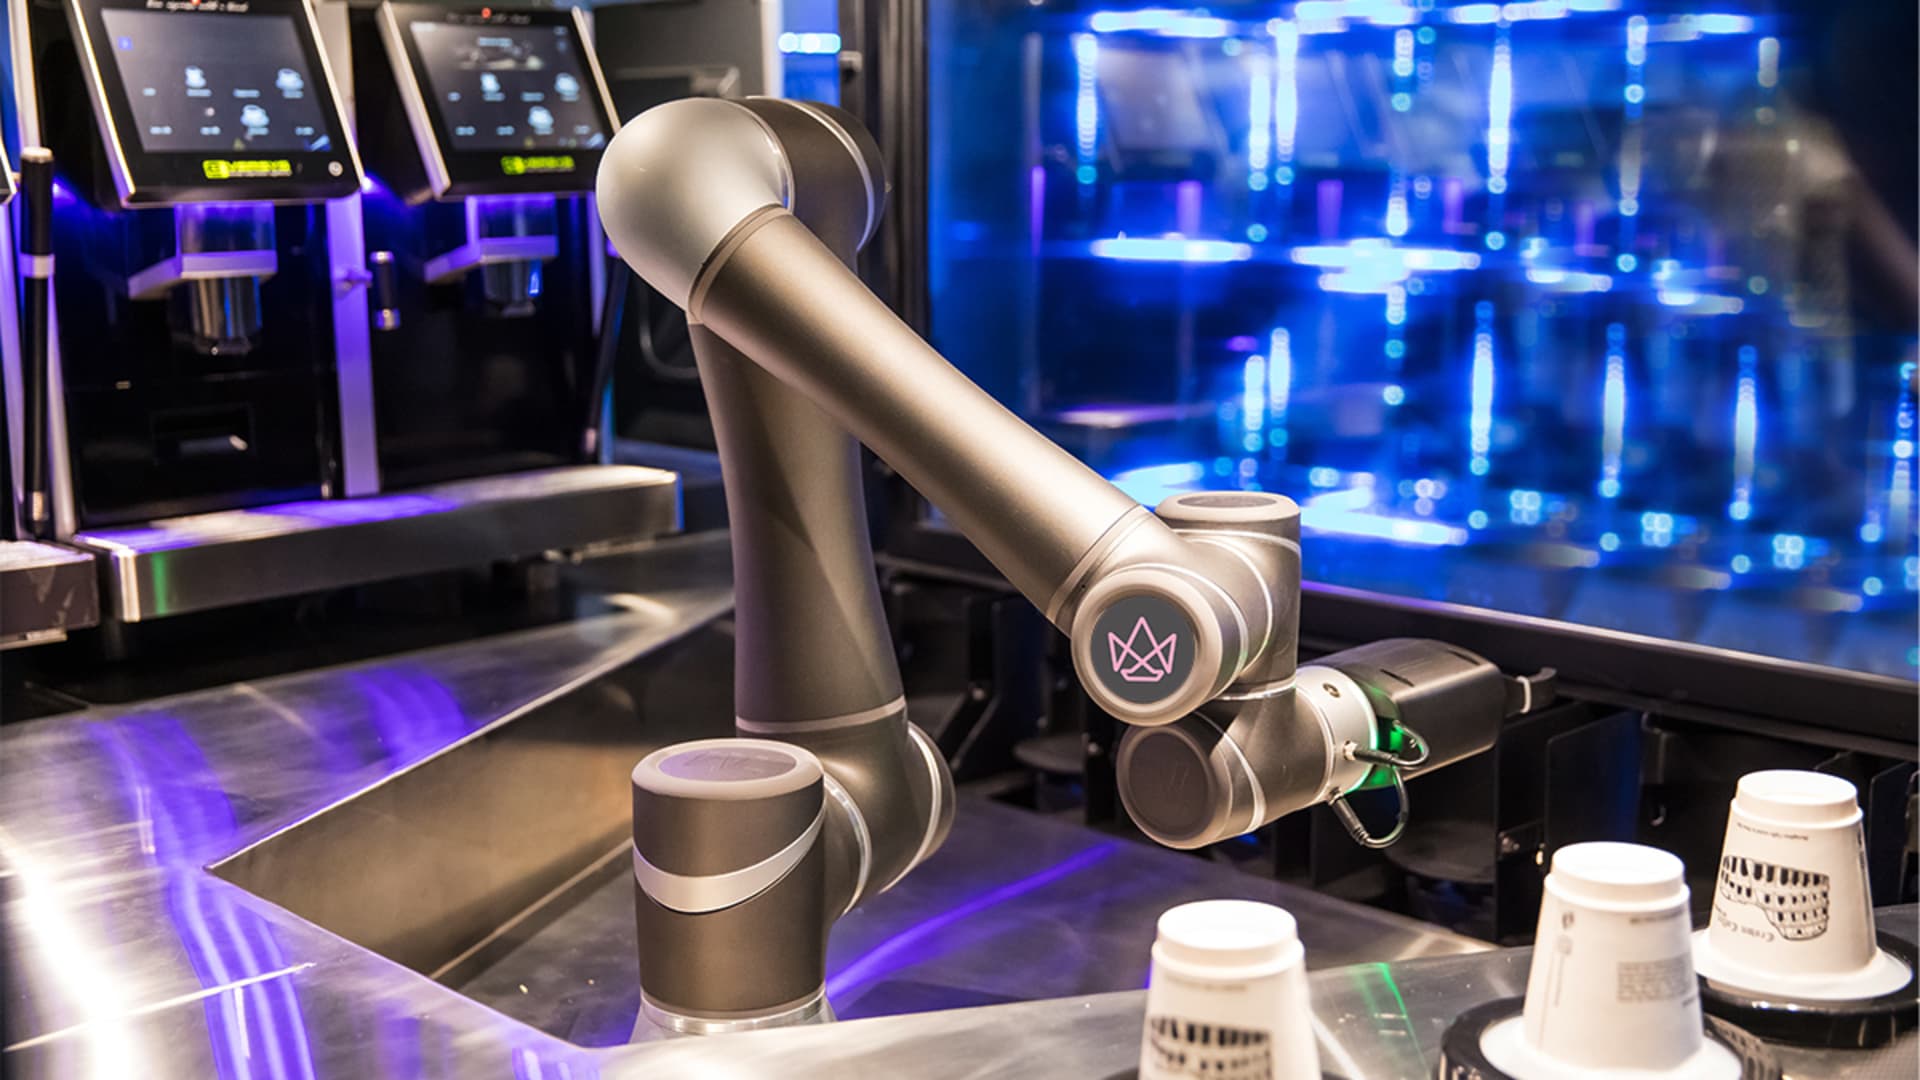 Singapore's first robotic barista, Ella, is created by internet of things start-up Crown Digital.